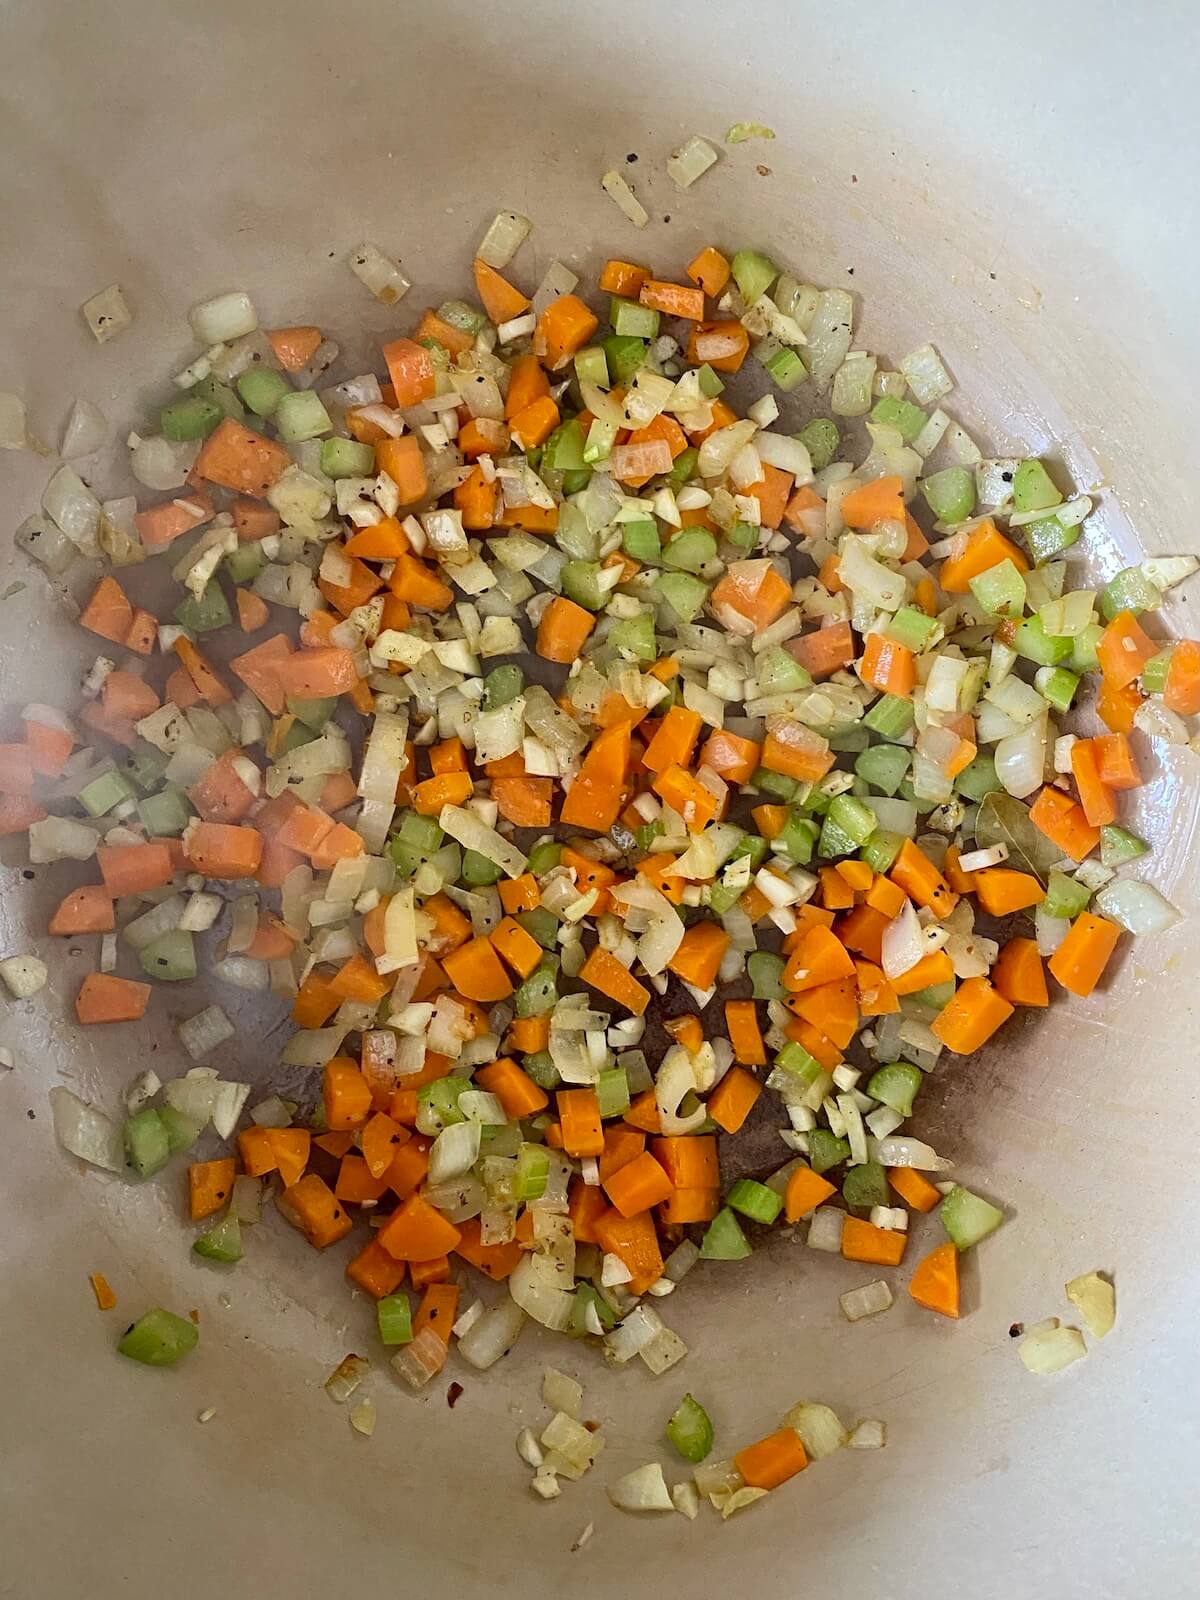 Onion, carrot, celery, garlic, salt, pepper, thyme, and a bay leaf being sautéed in olive oil in a Dutch oven.